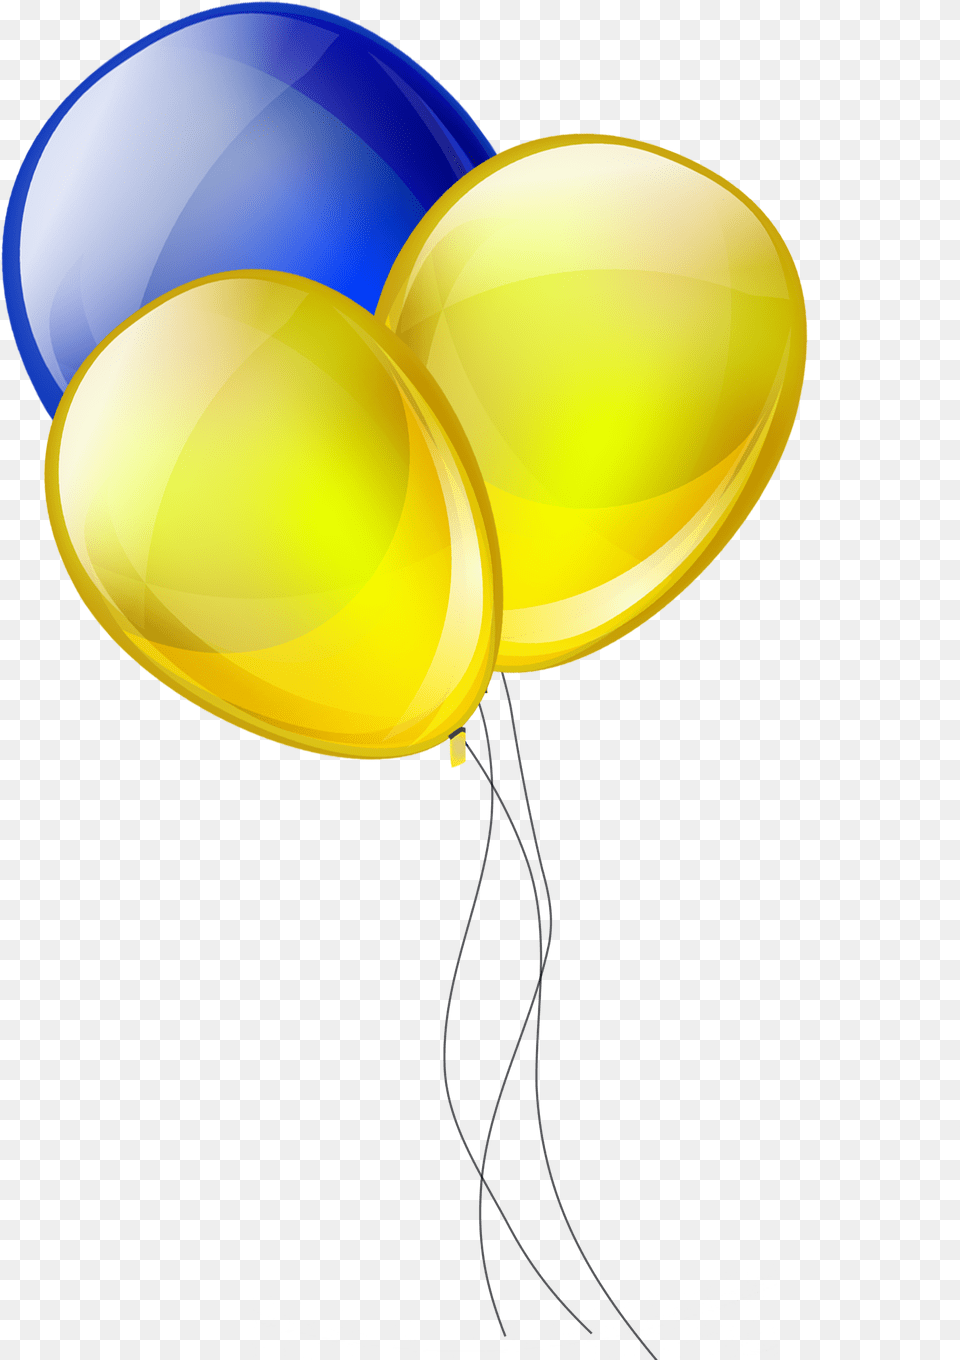 Contact Blue And Gold Balloons Clipart Transparent Blue And Gold Balloons Clipart, Balloon Free Png Download